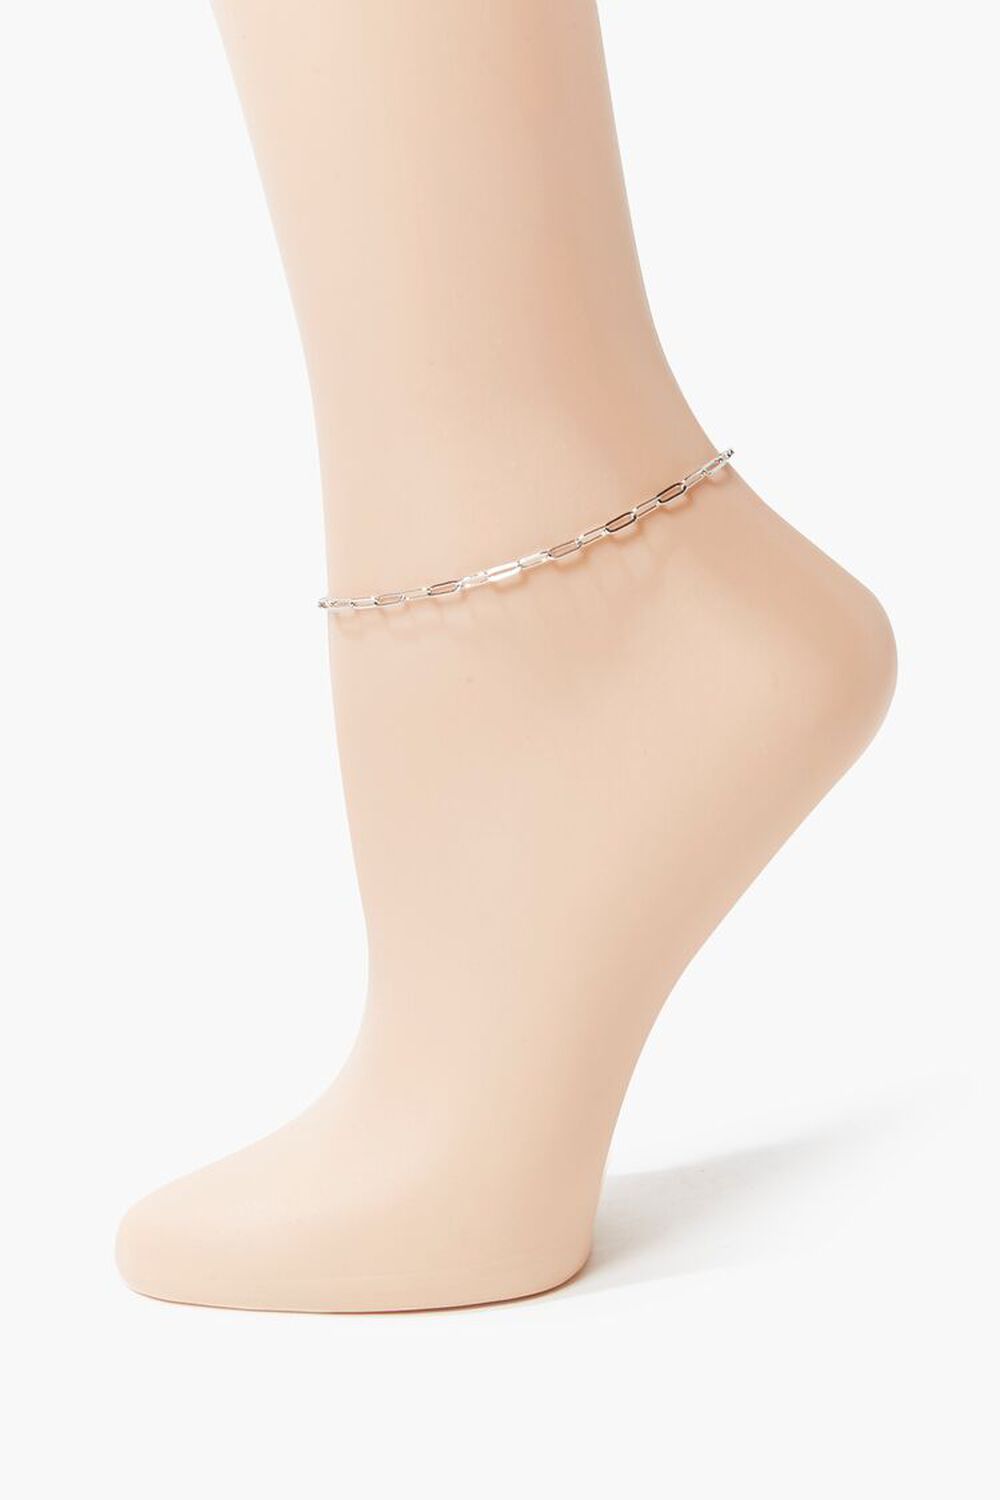 SILVER Anchor Chain Anklet, image 1